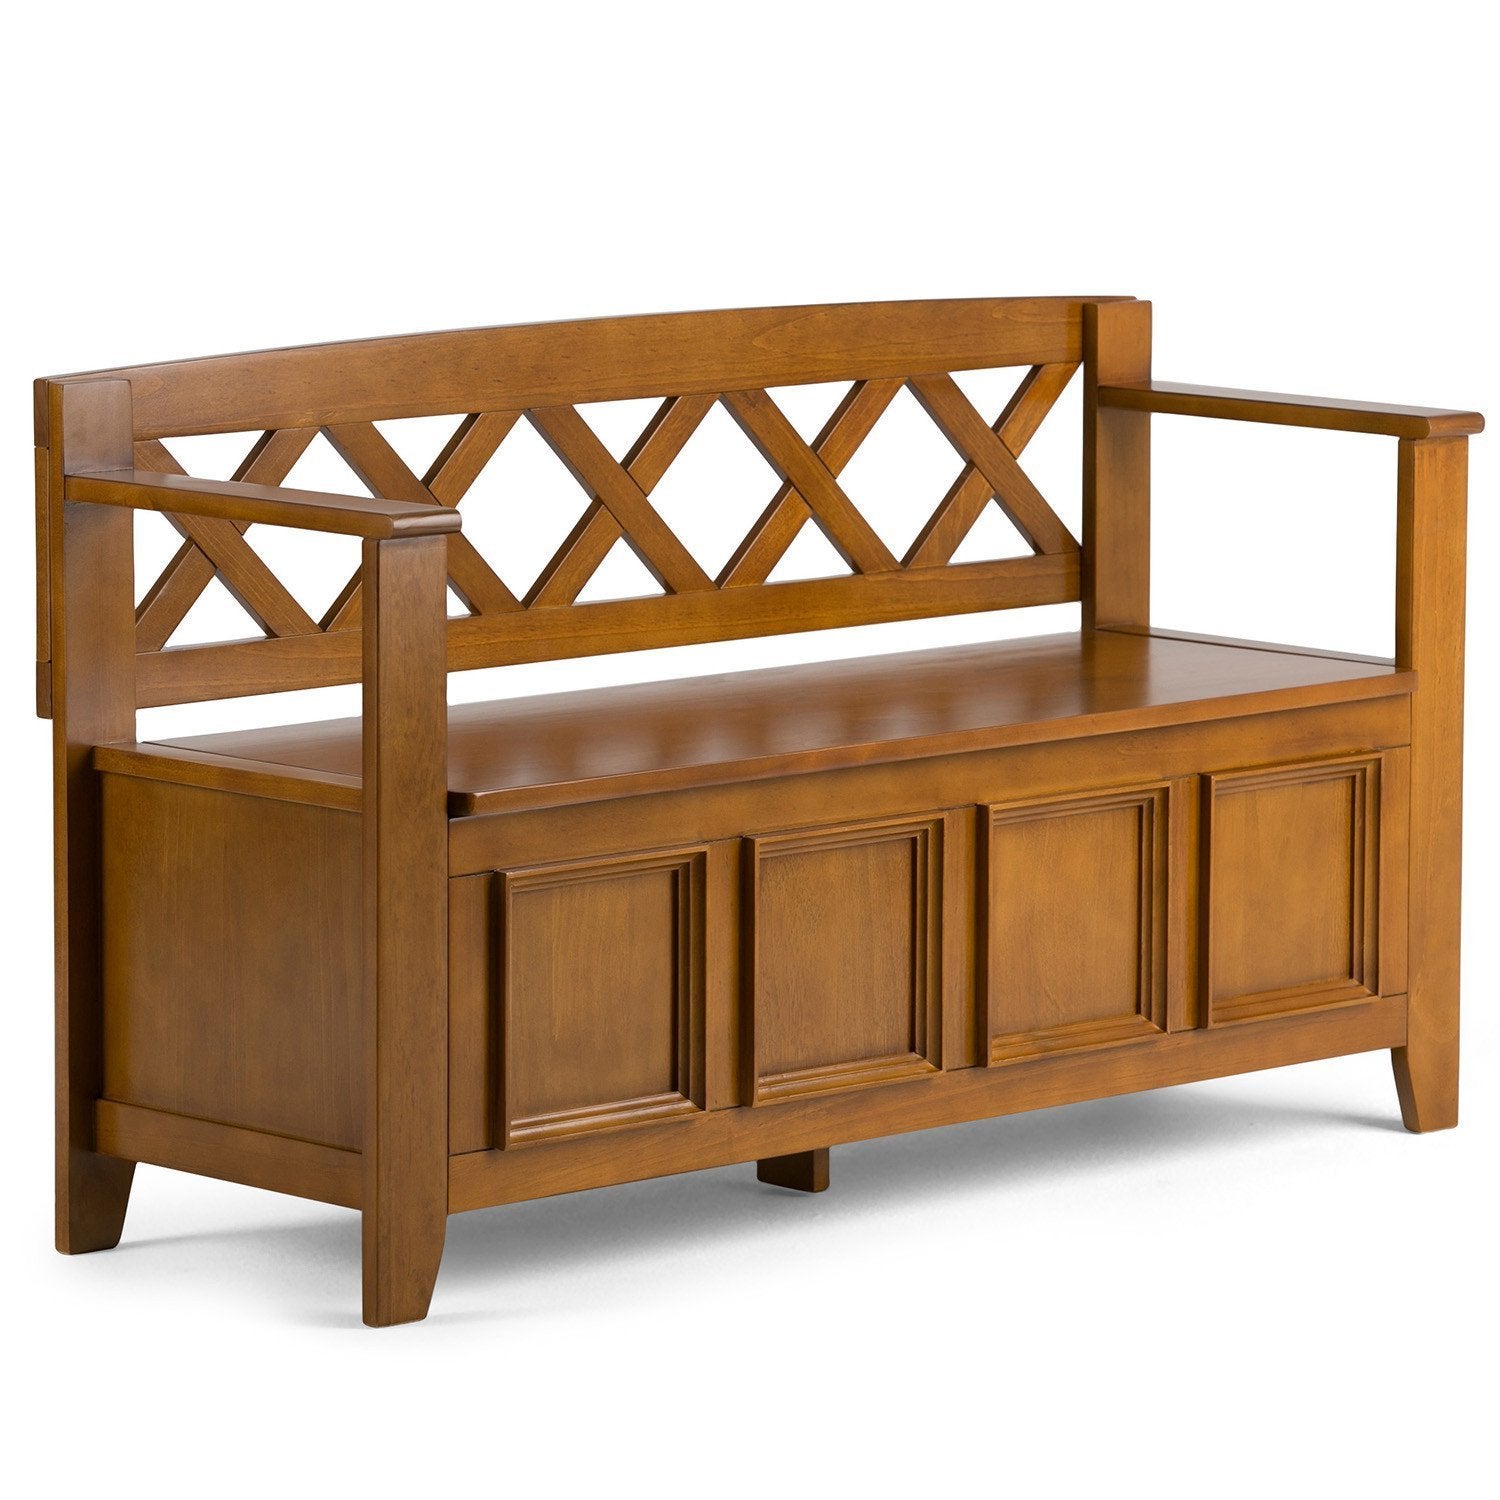 Light Avalon Brown | Amherst Entryway Bench